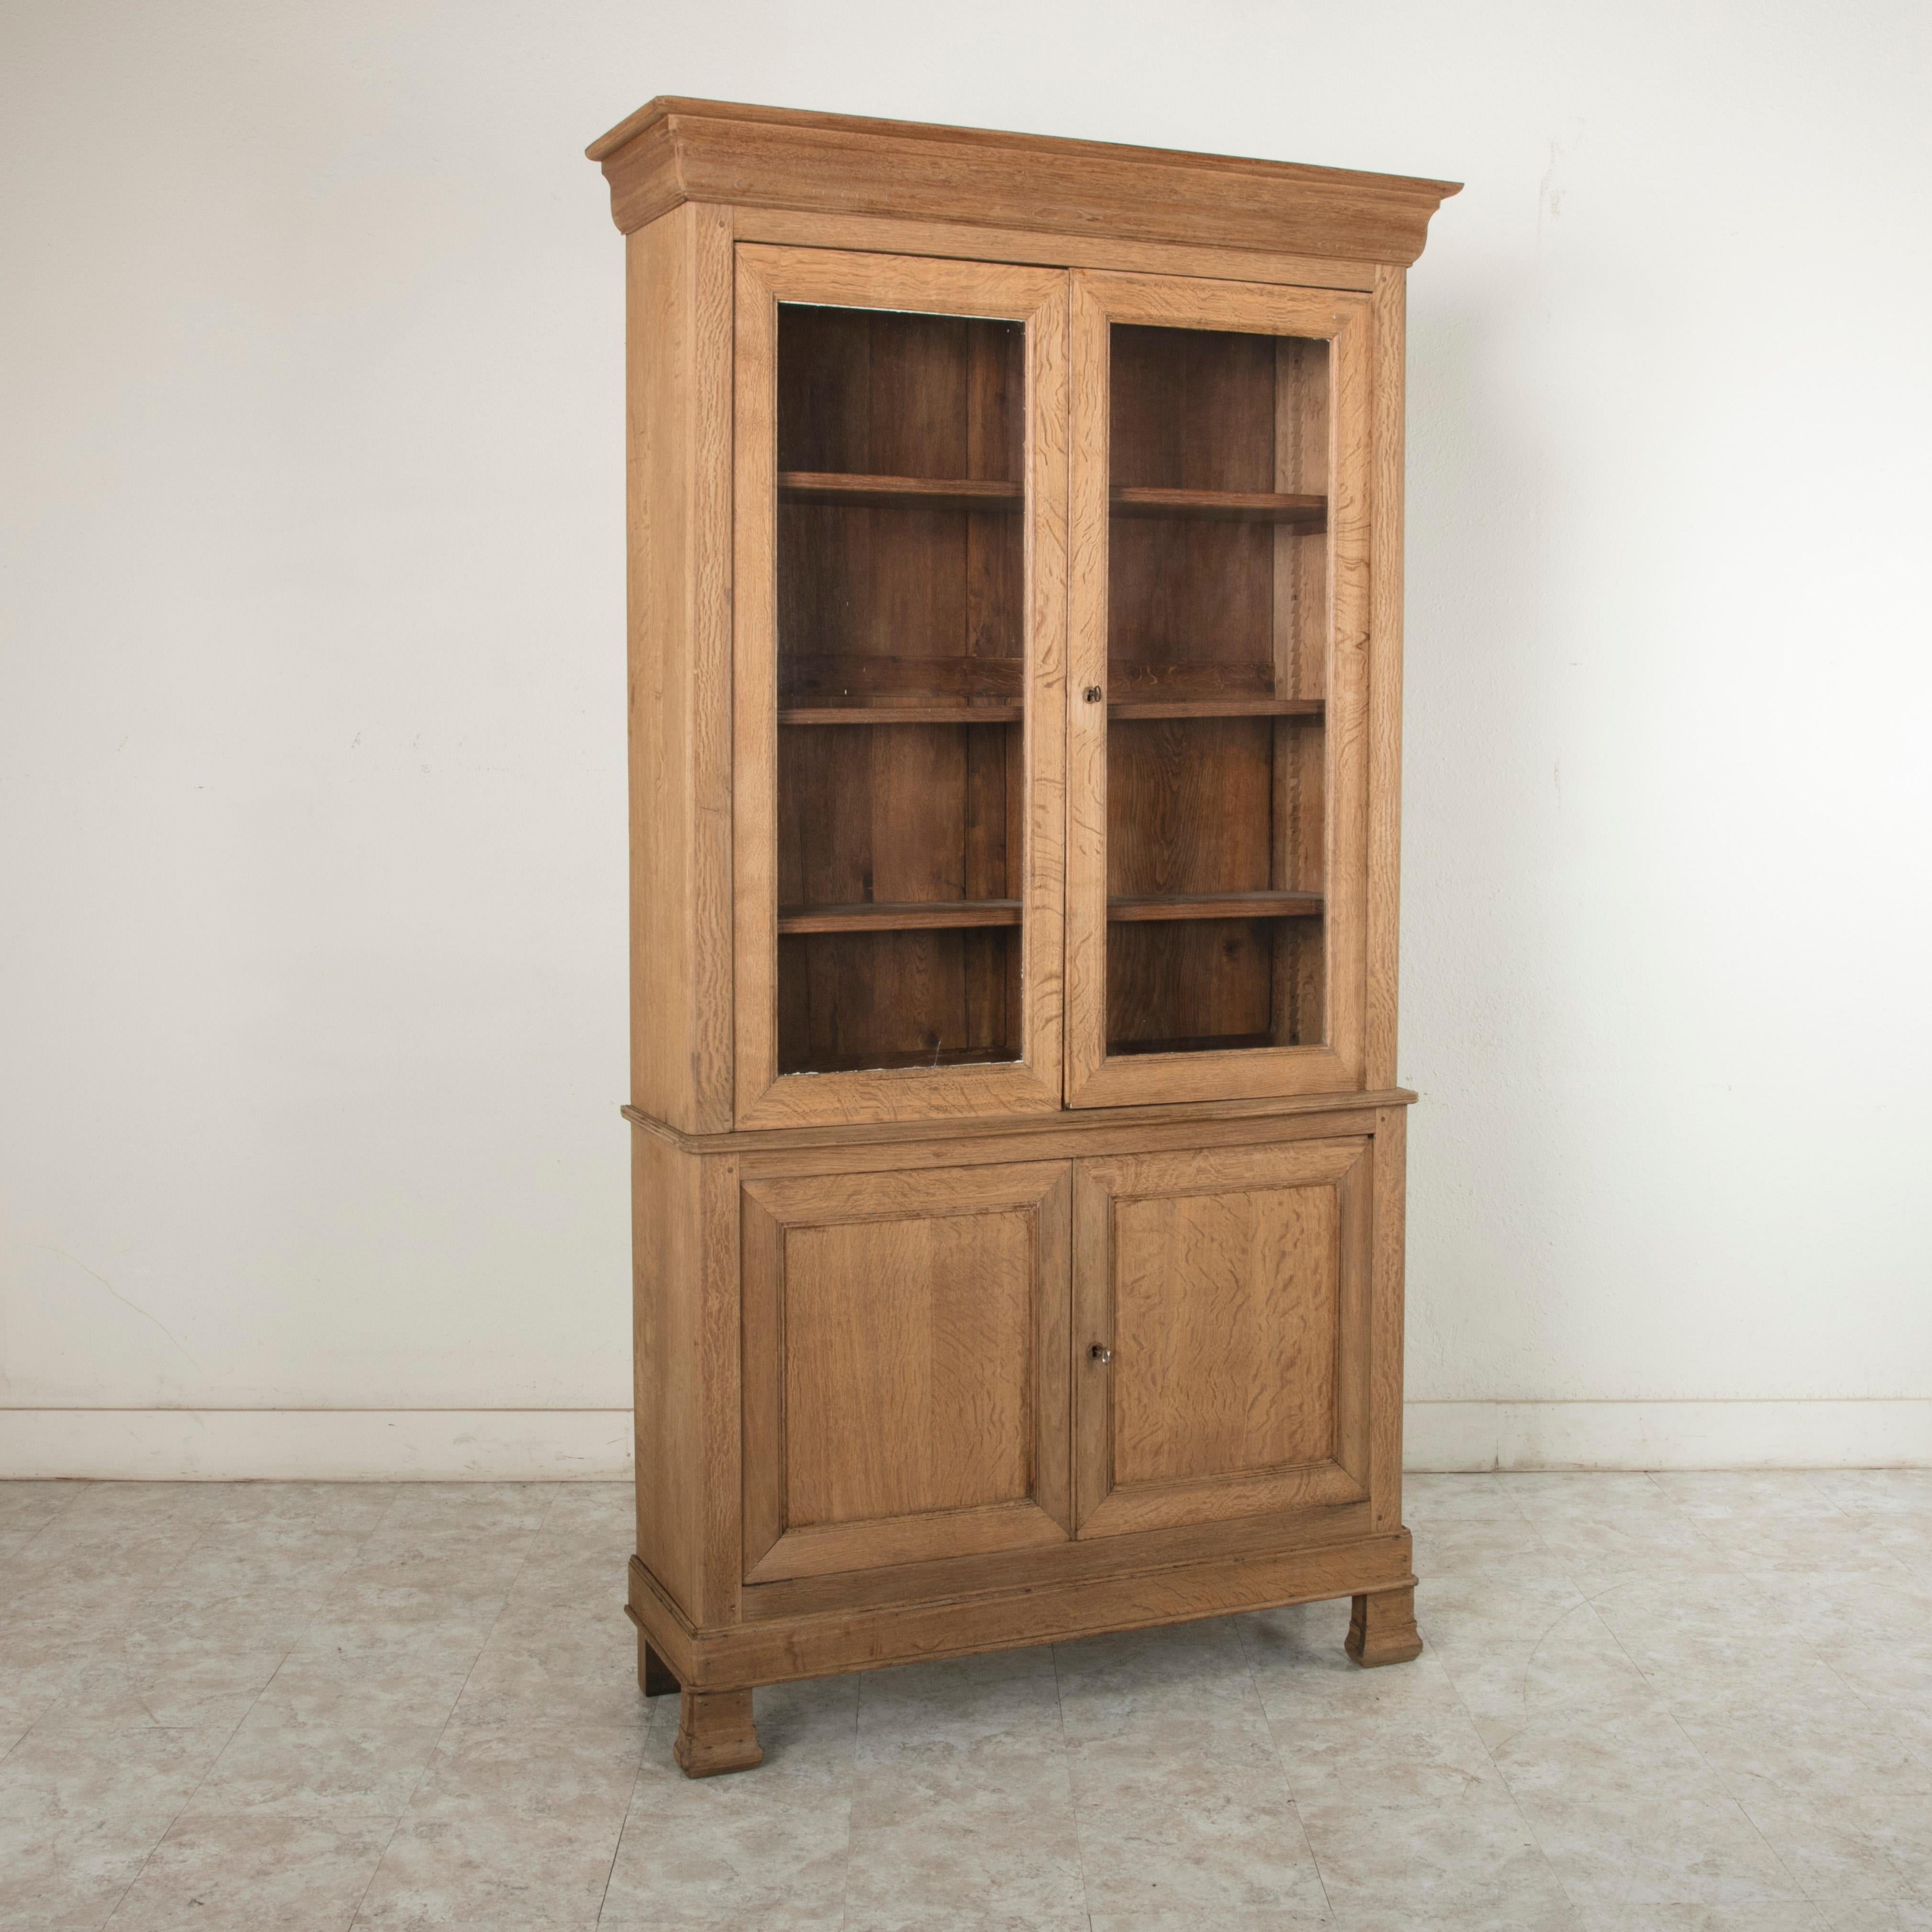 This French Louis Philippe period oak buffet deux corps bookcase from the 19th century features a closed lower cabinet with two doors and an upper cabinet with its original hand blown glass doors. The glass displays beautiful waves and bubbles.